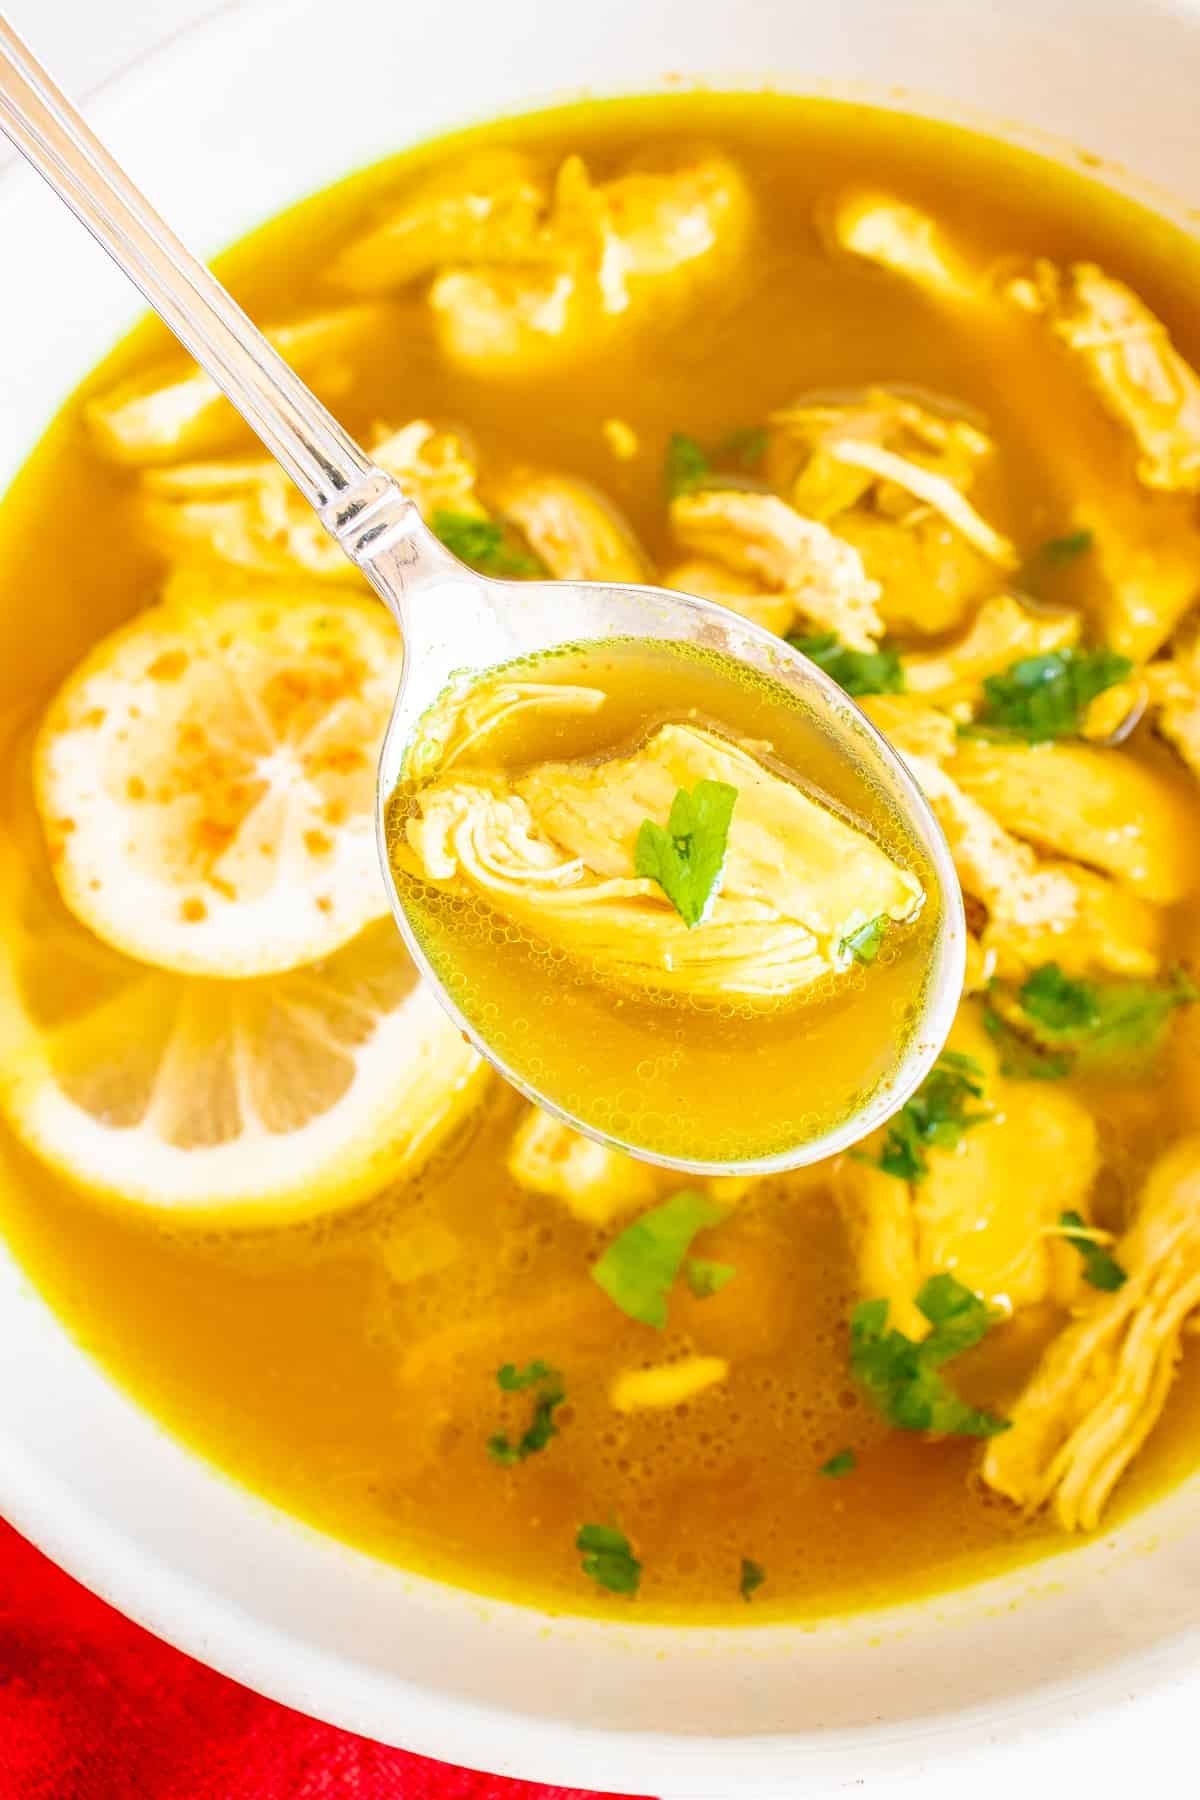 A spoon digging into a bowl of ginger lemon chicken soup.